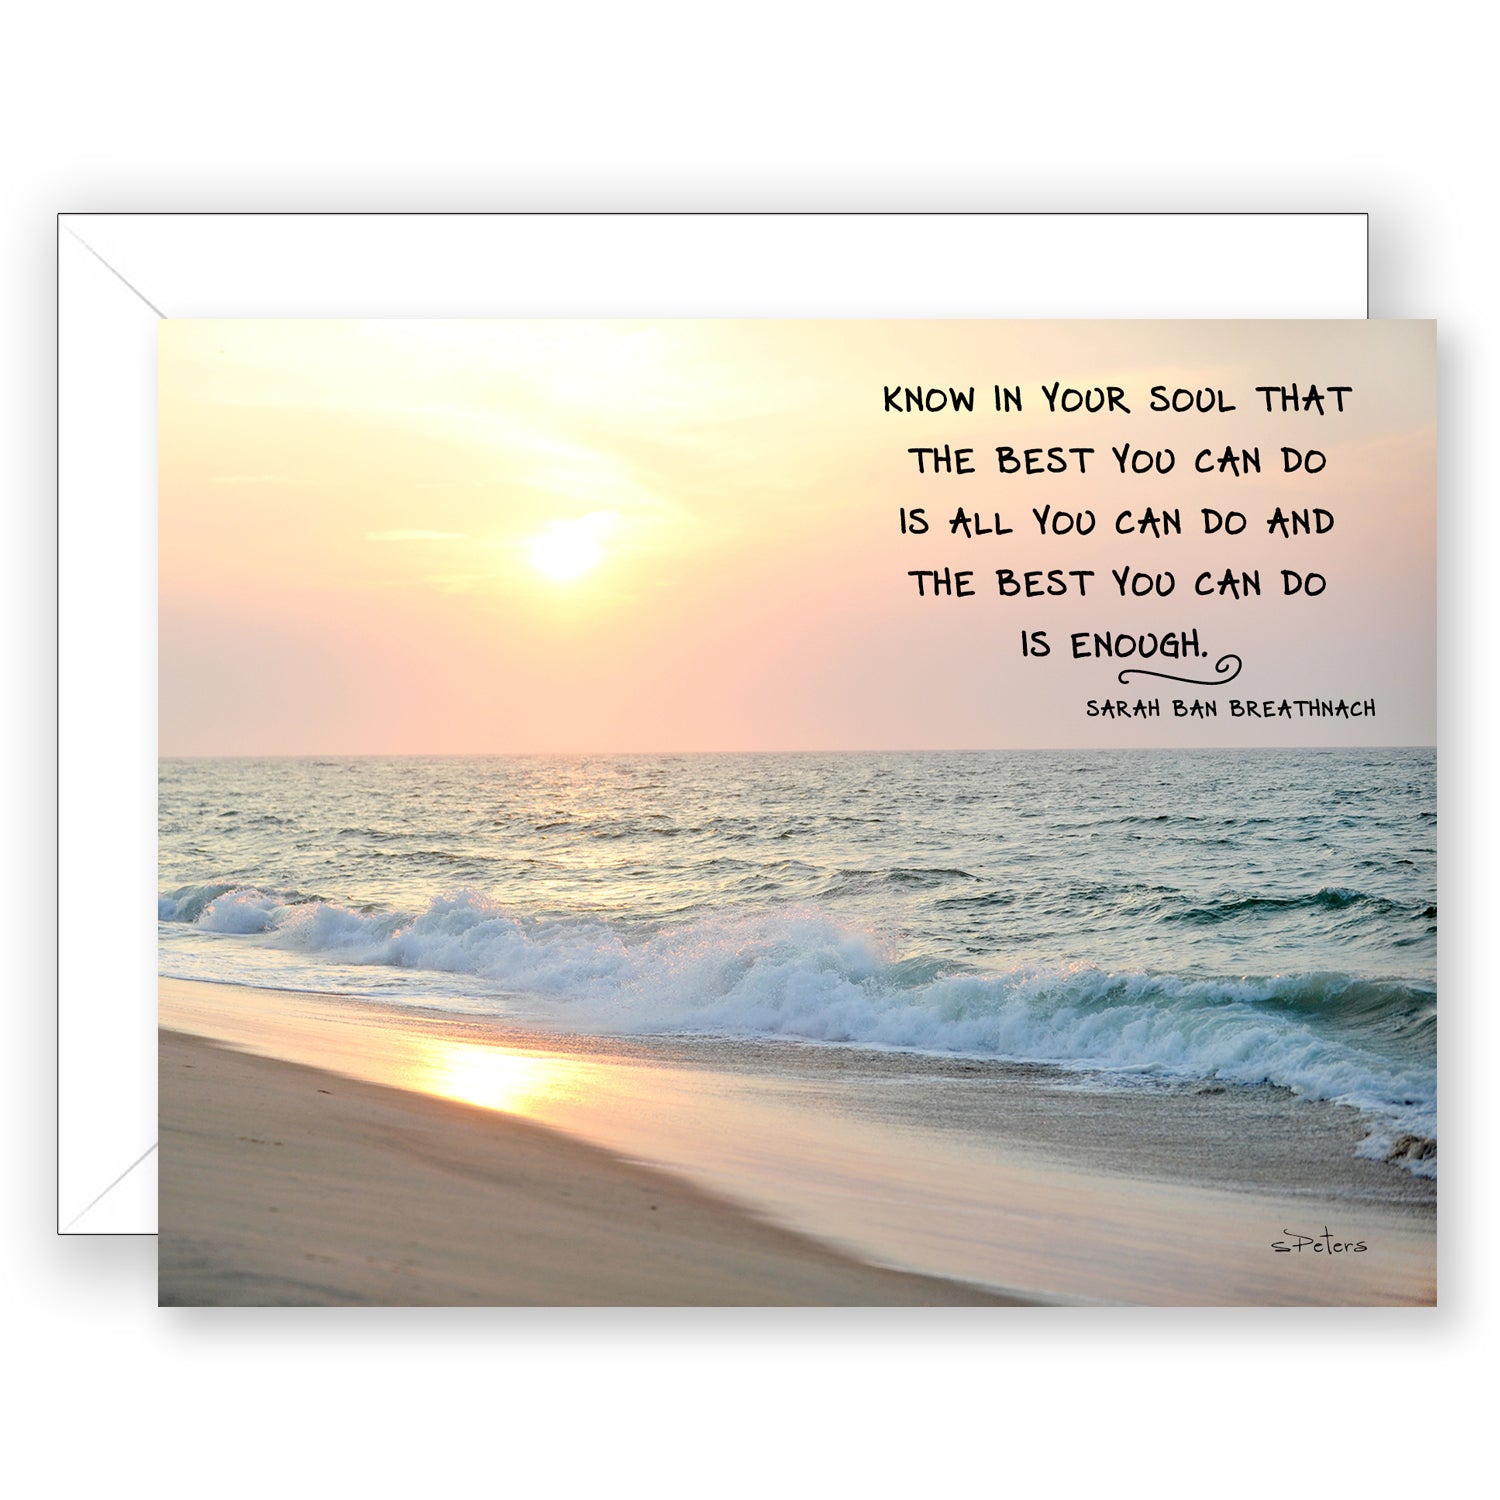 Sound of the Surf - Encouragement Card